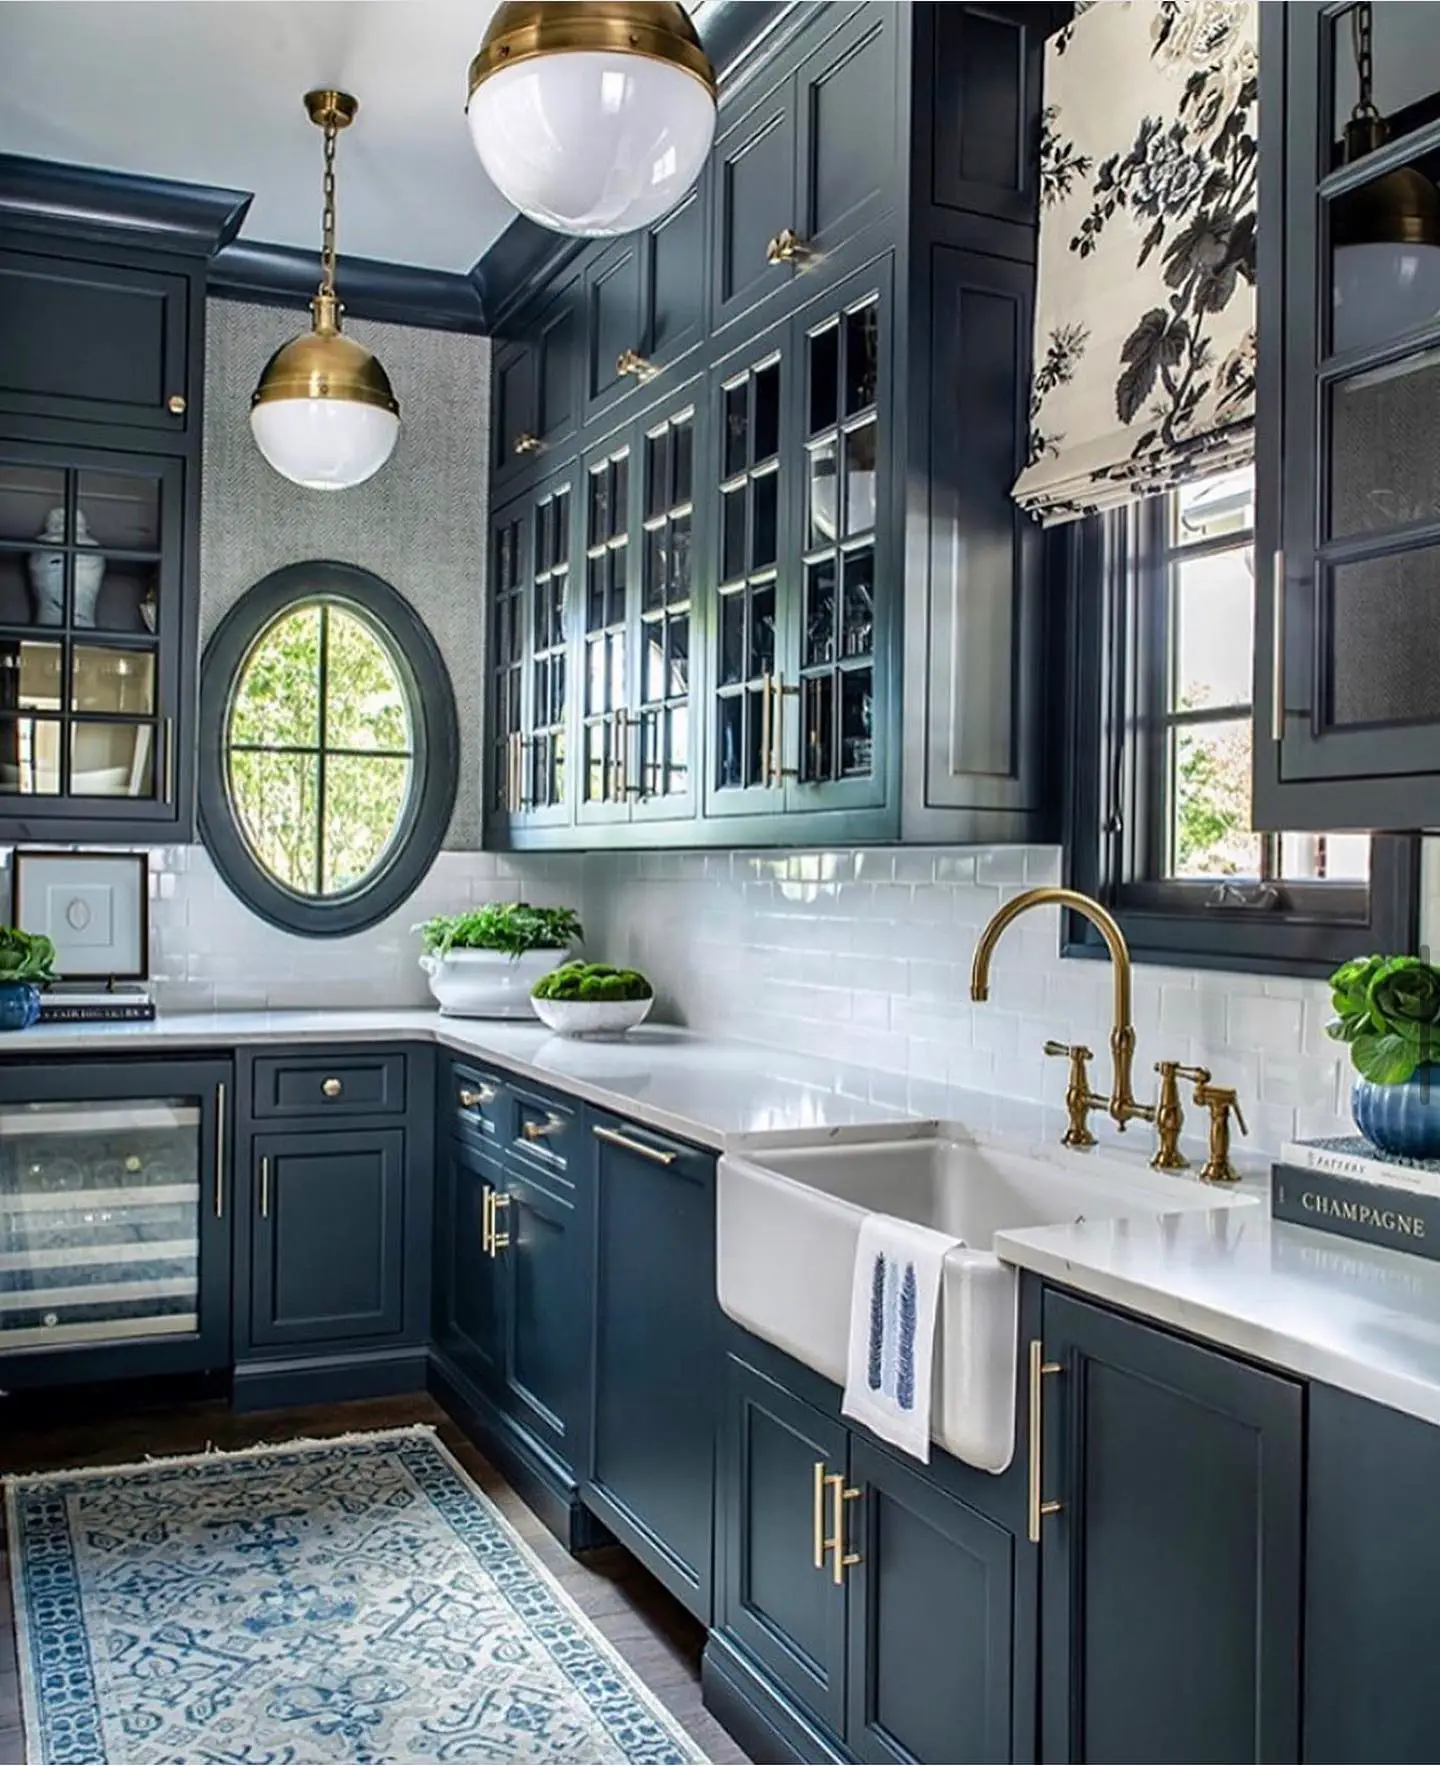 A kitchen with blue cabinets and a blue rug.